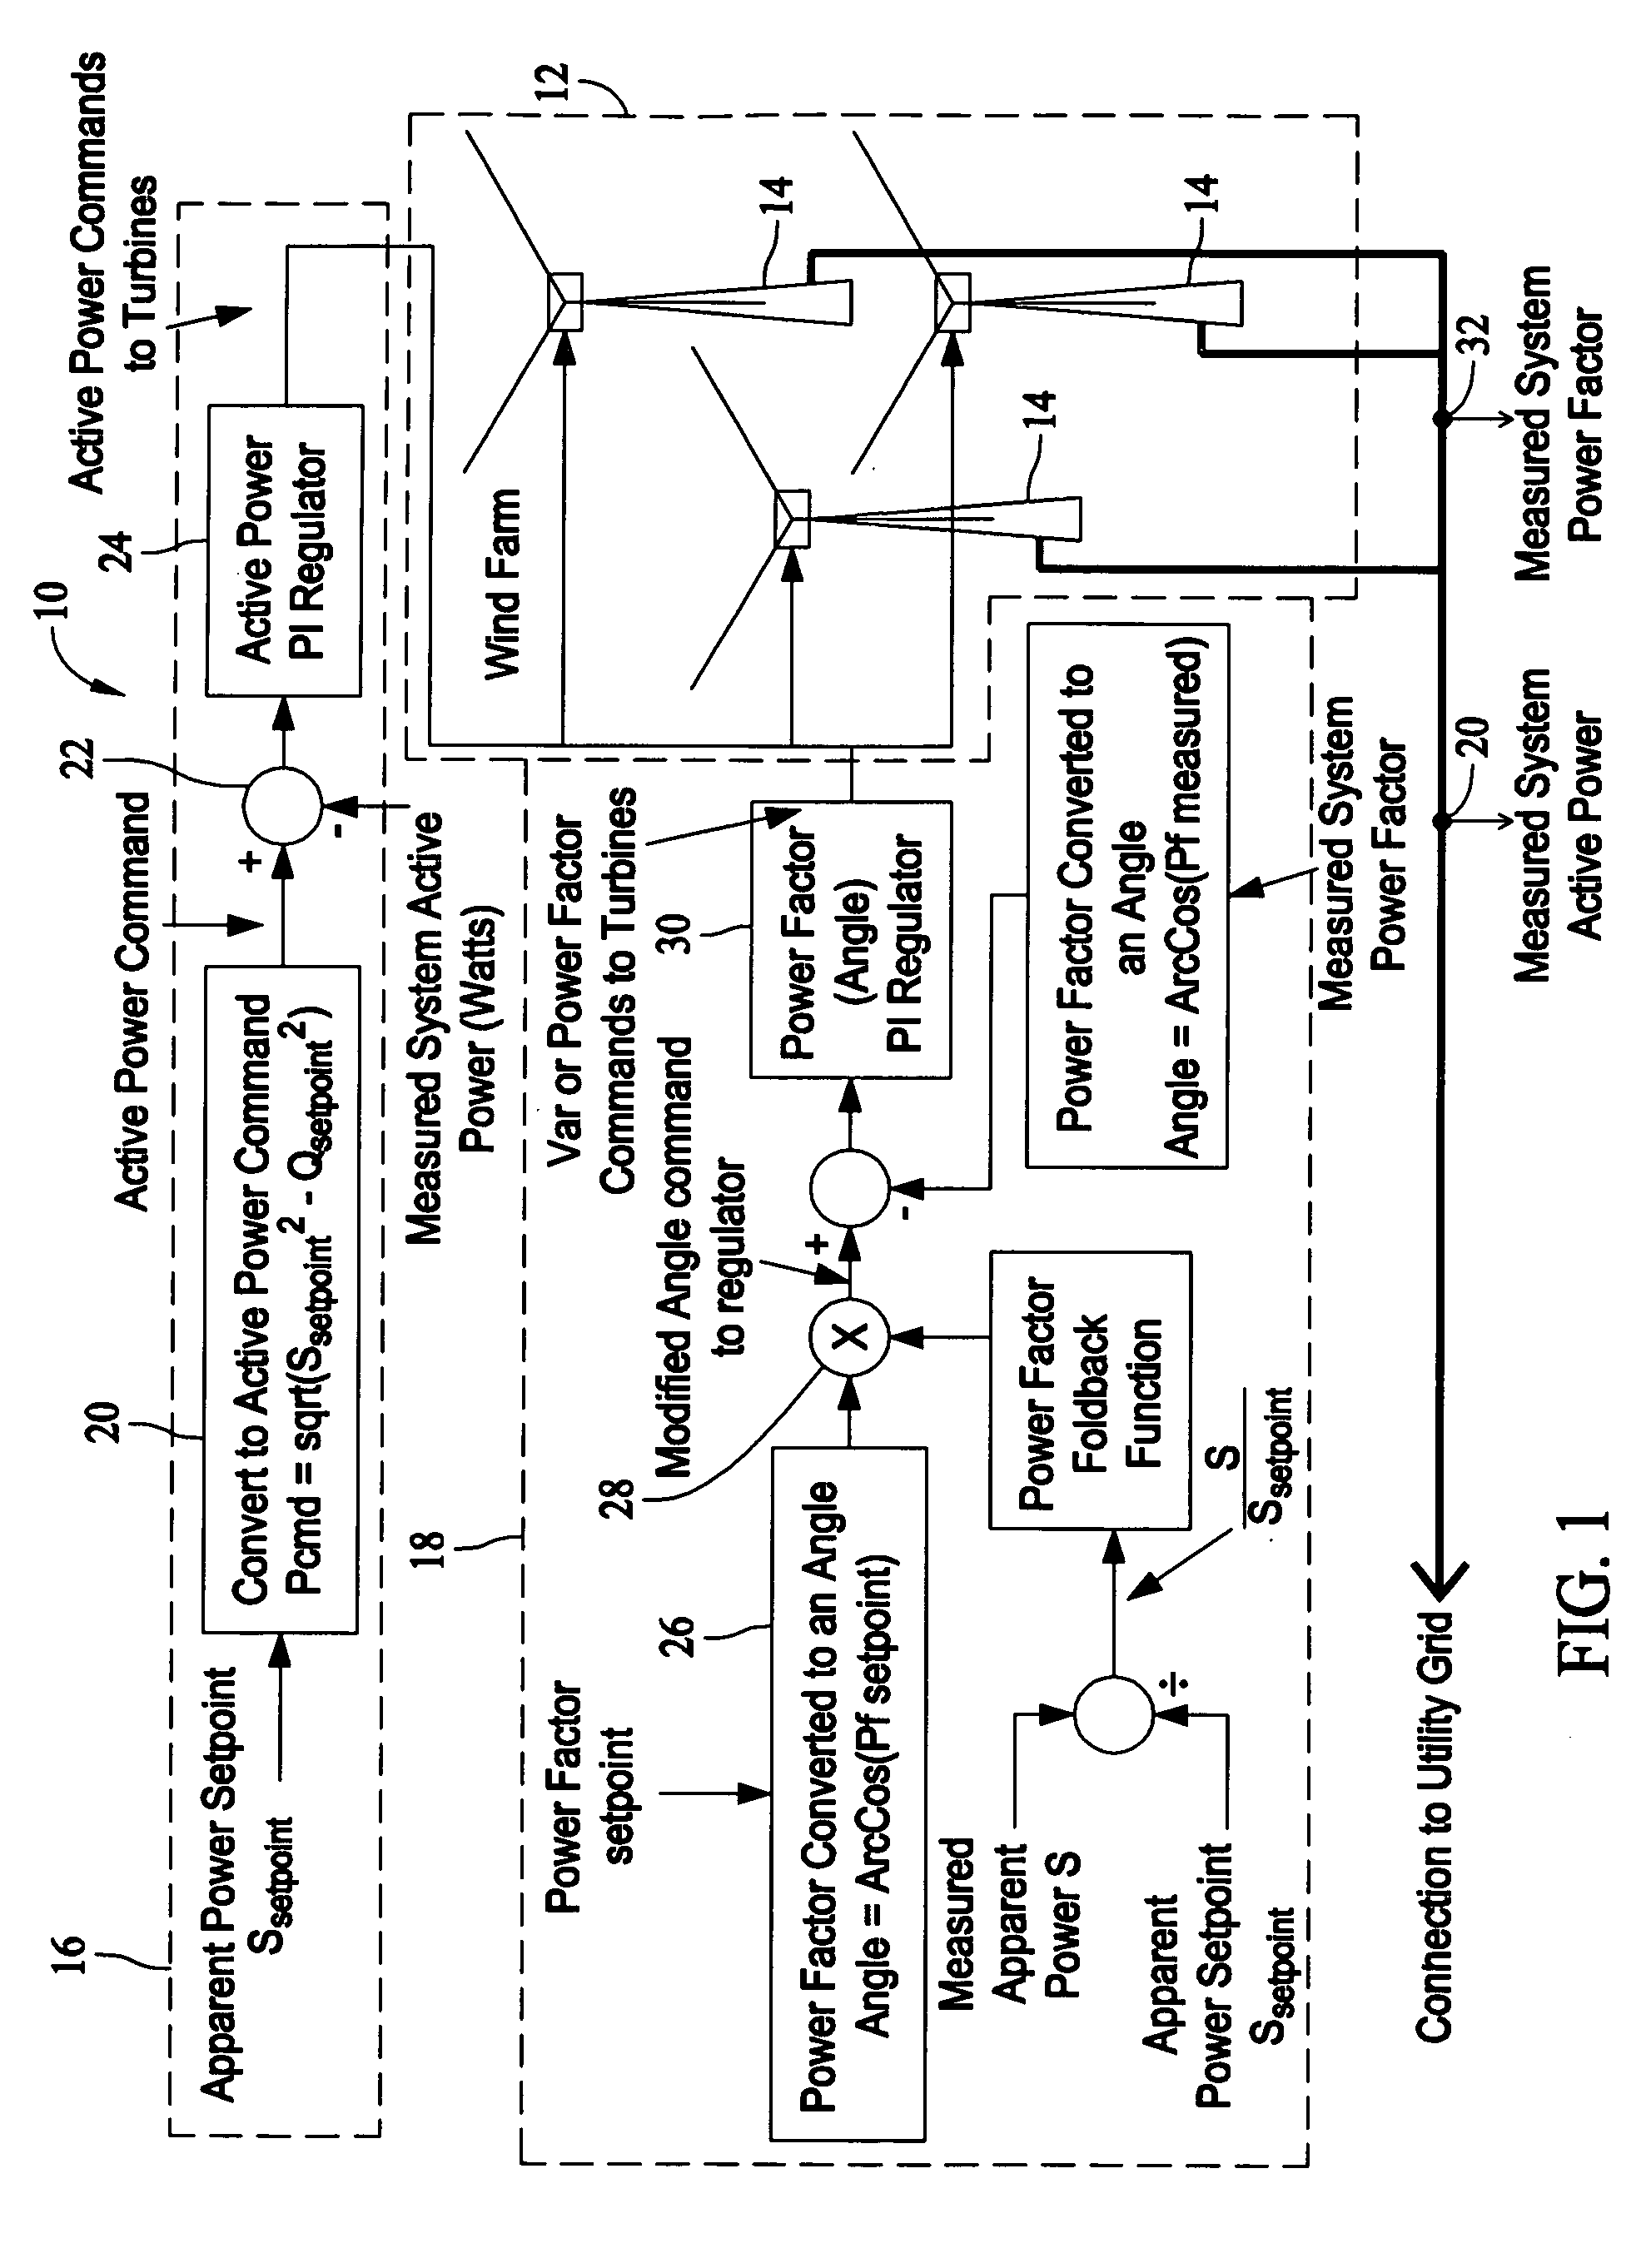 Methods and apparatus for controlling windfarms and windfarms controlled thereby